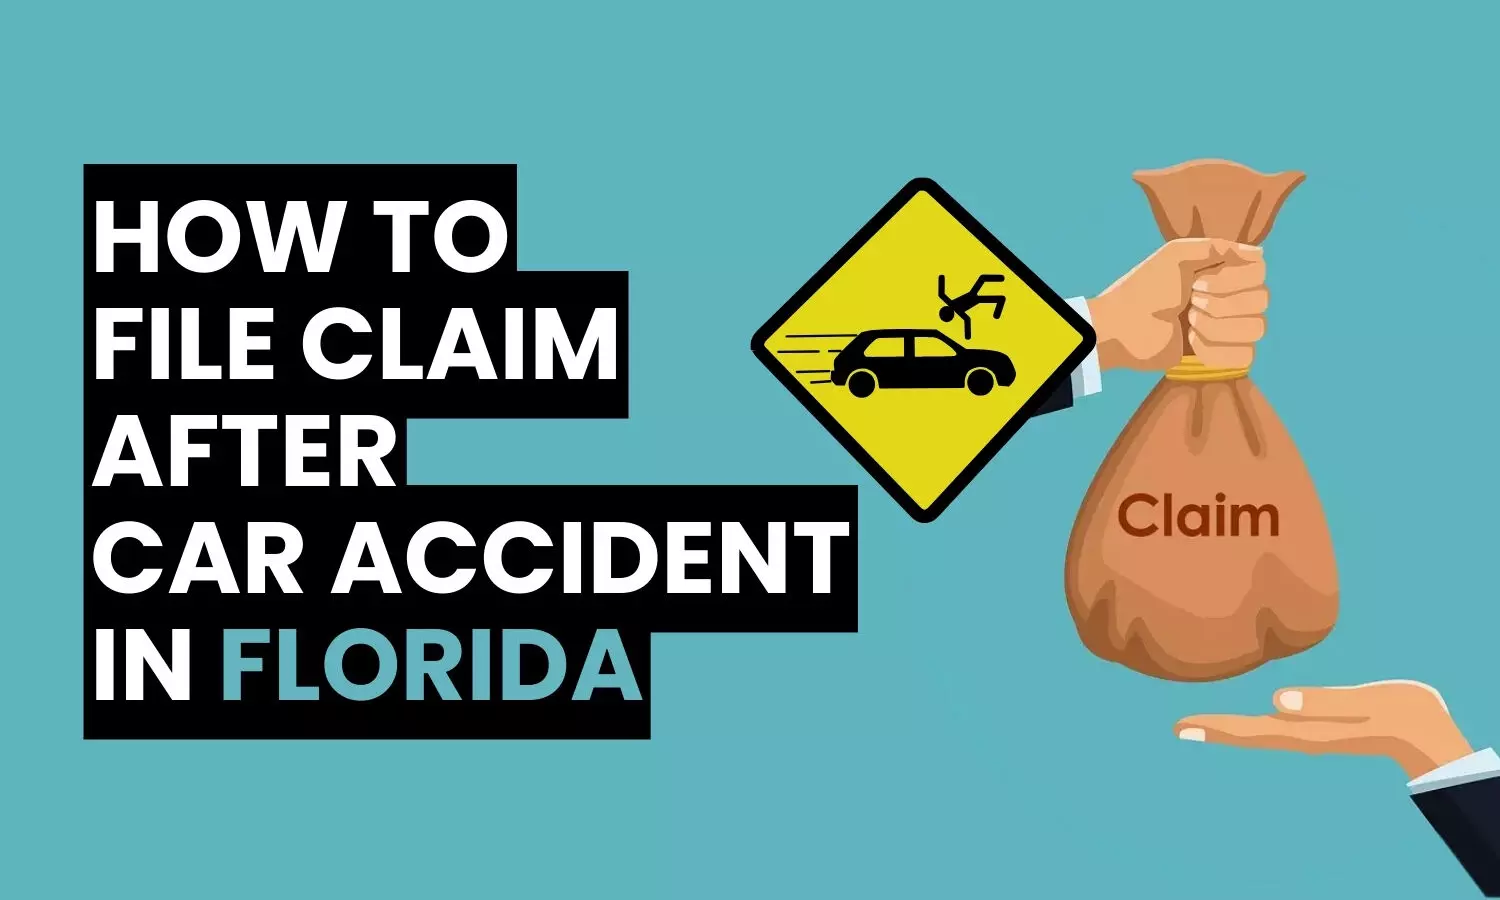 How to File a Claim After a Car Accident in Florida